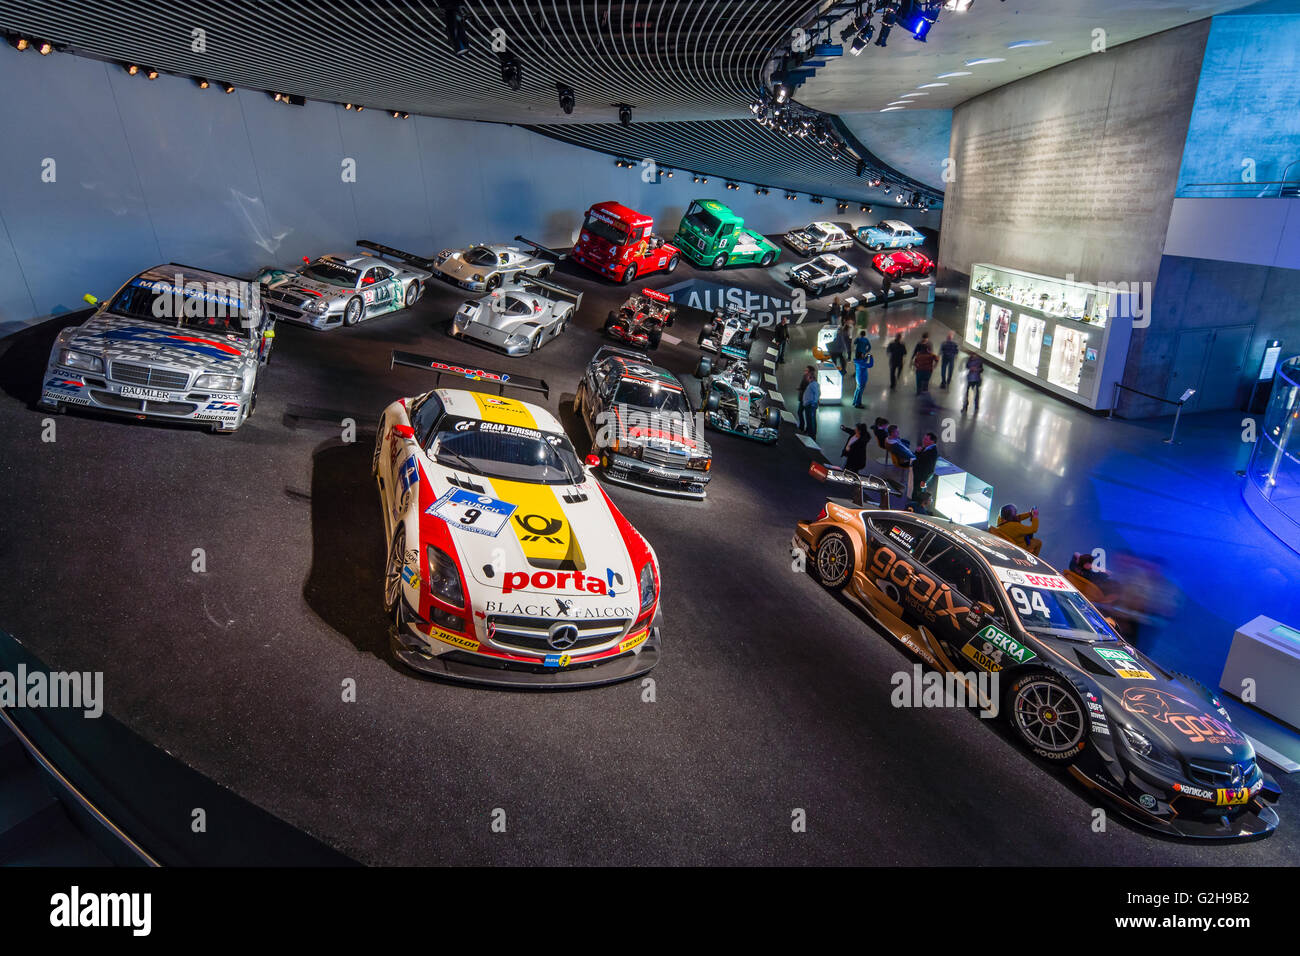 STUTTGART, GERMANY- MARCH 19, 2016: Gallery of sports and racing cars of different classes. Mercedes-Benz Museum. Stock Photo